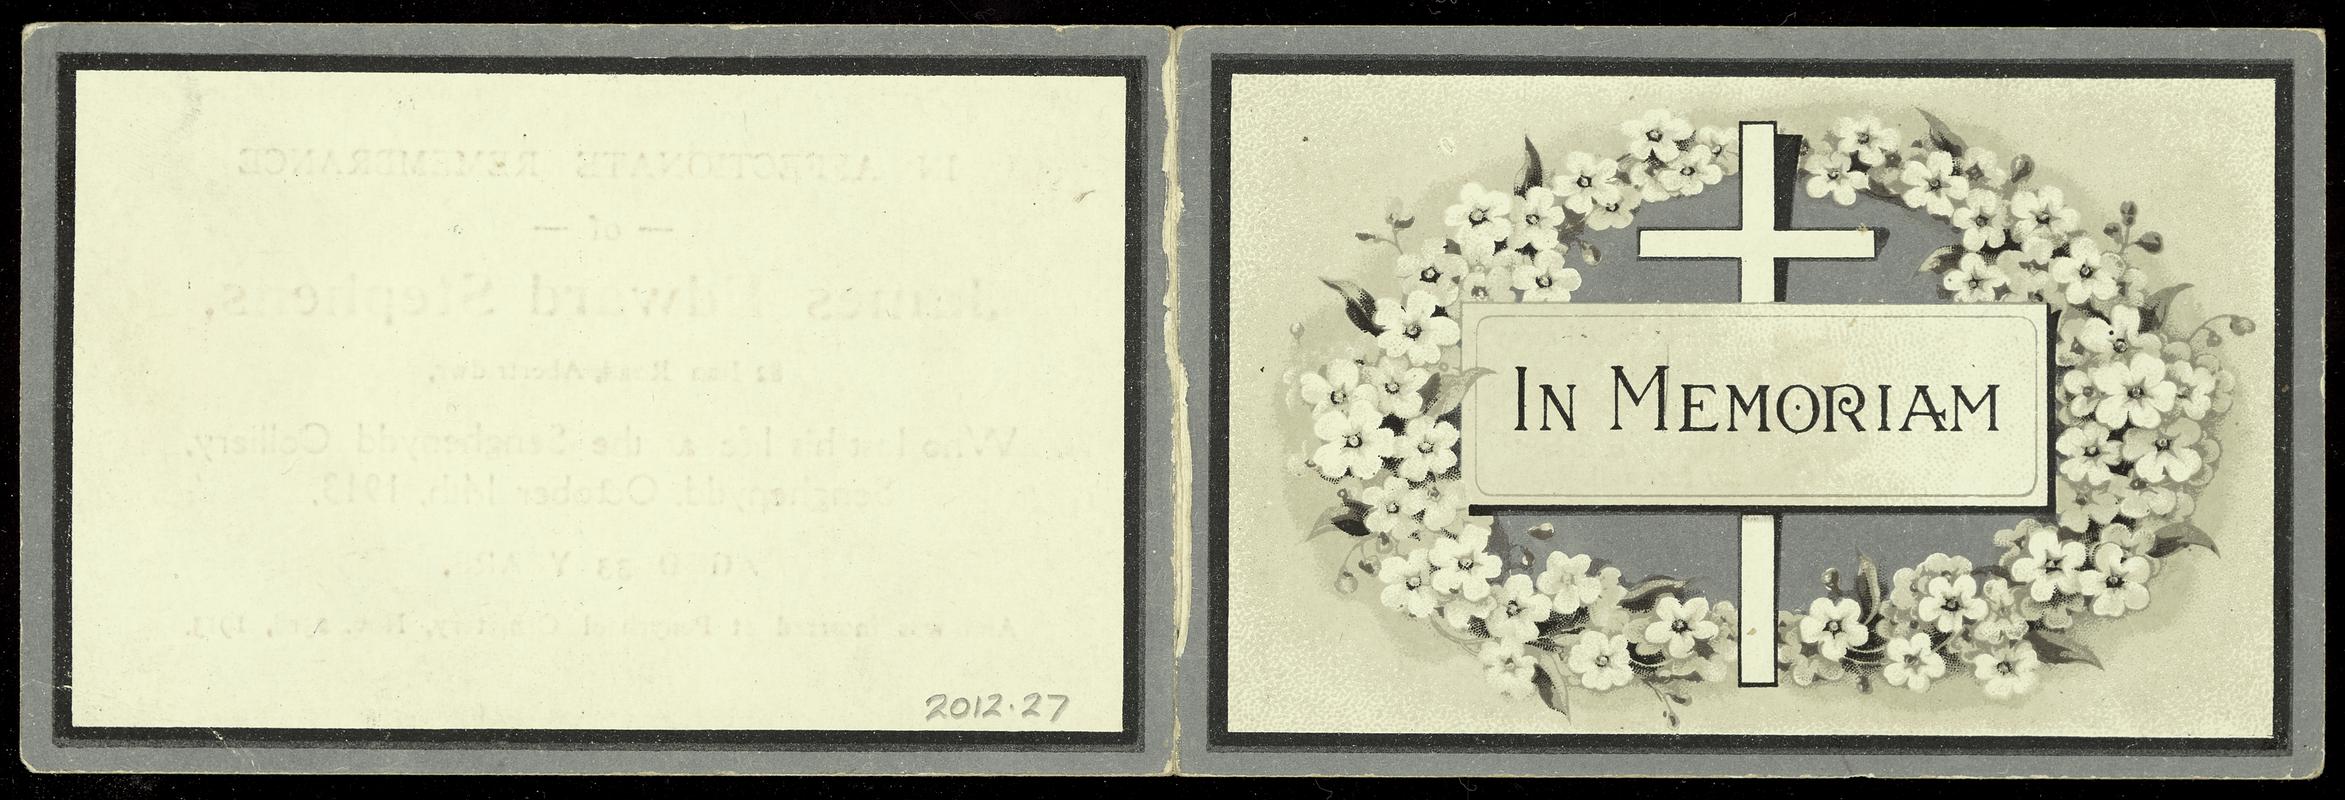 Universal Colliery, Senghenydd, memorial card front and back